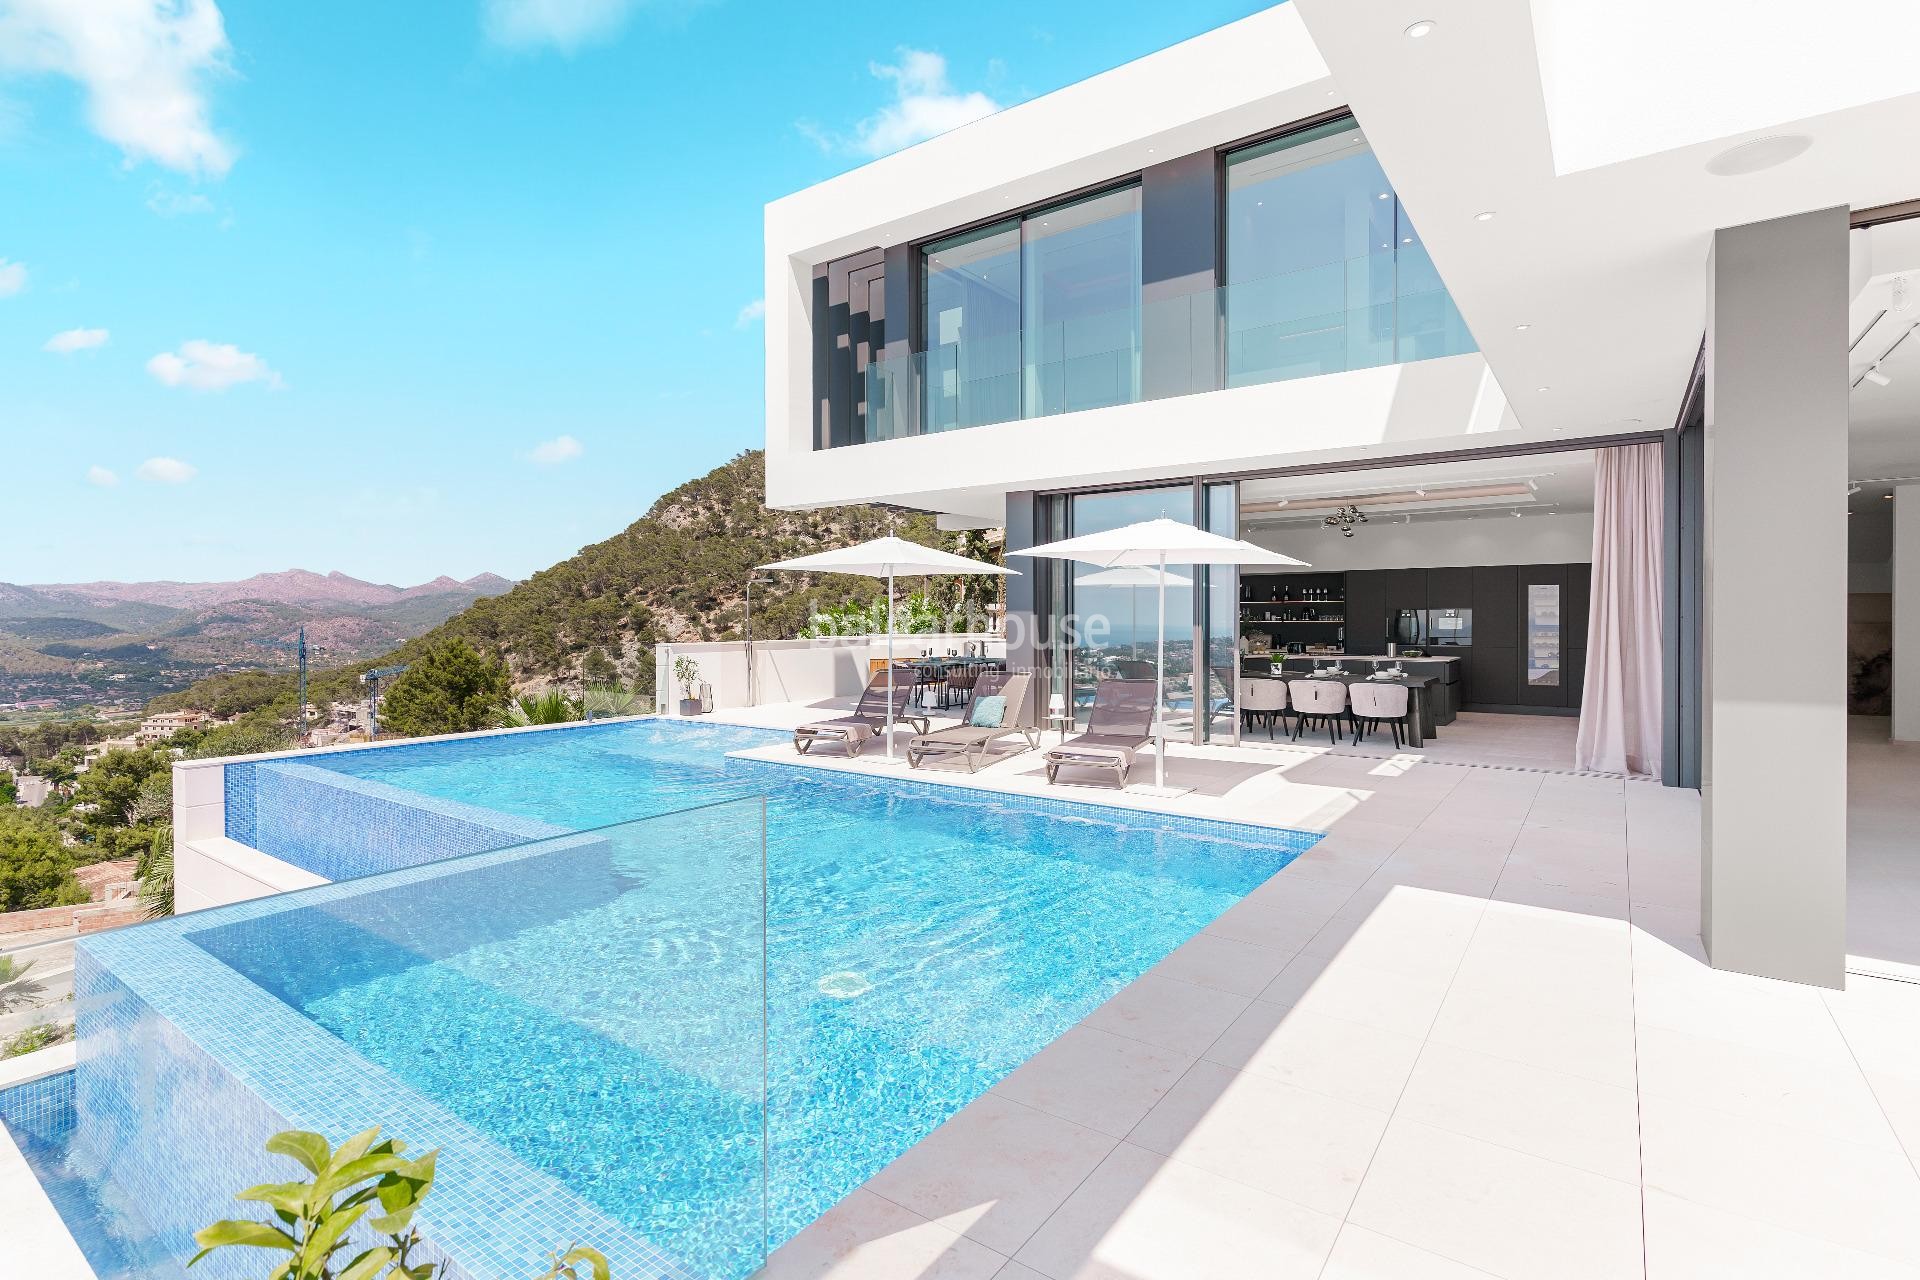 Spectacular sea views from every angle in this exclusive new build villa located in Cala Llamp.